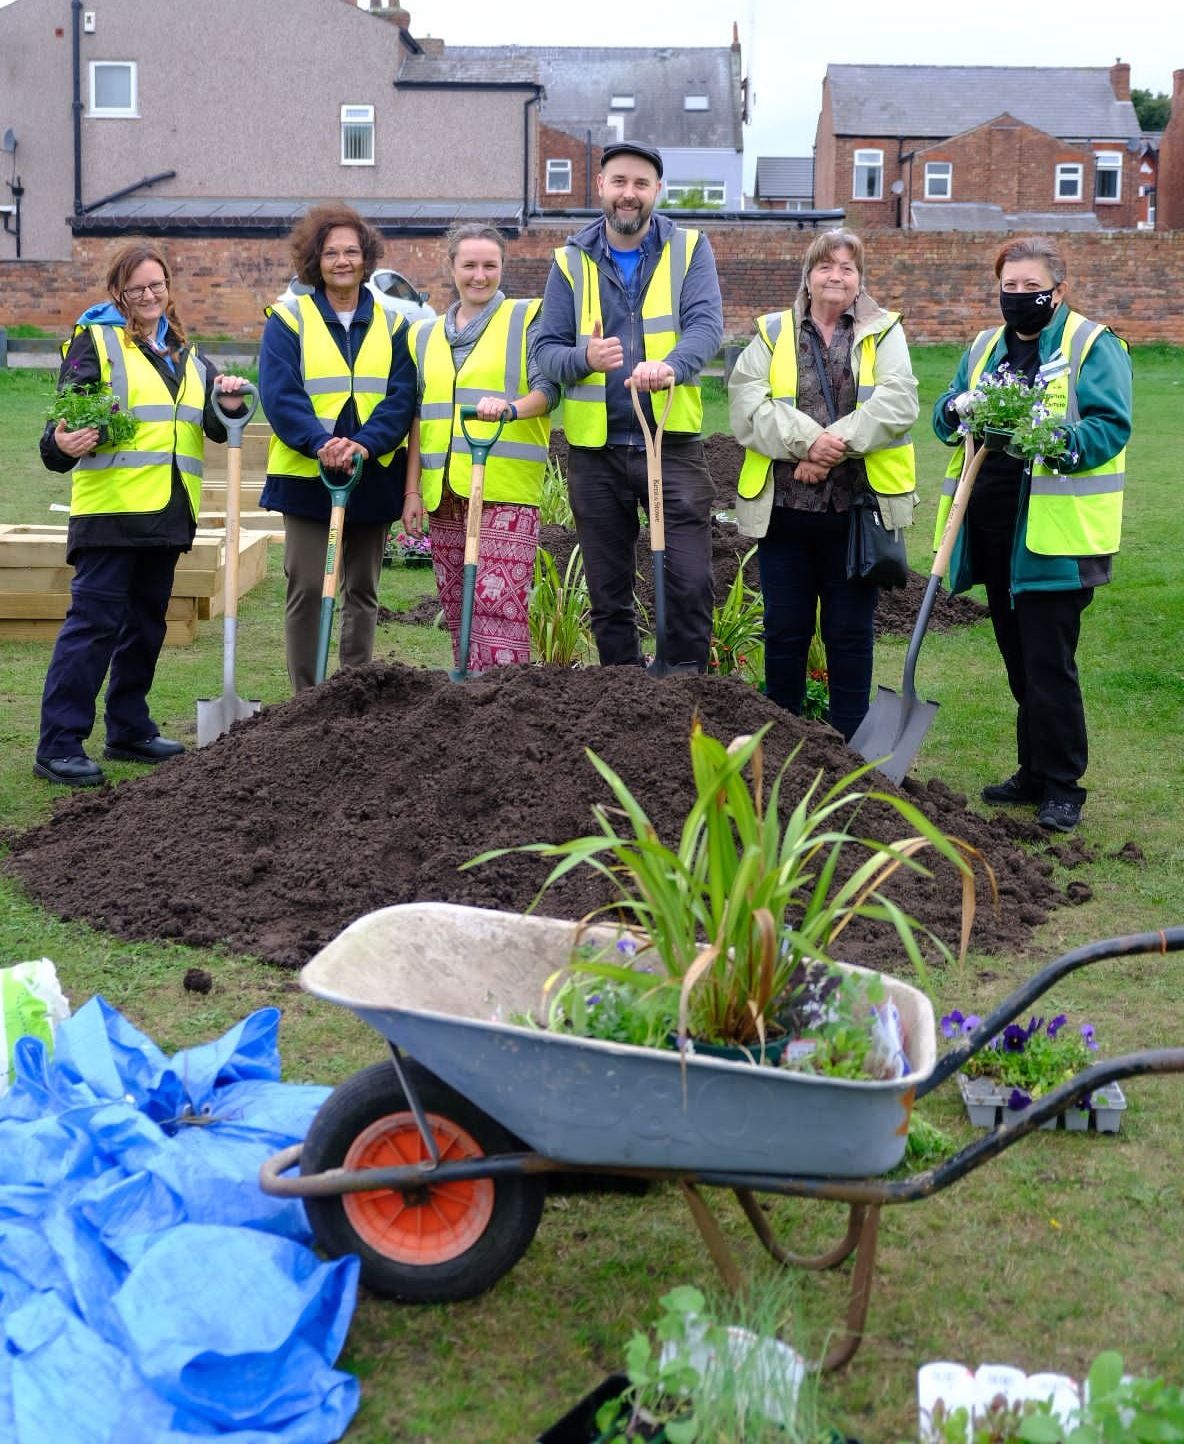 The 'Friends of High Park Green Spaces' Community Group have made great strides towards improving parks in their local area